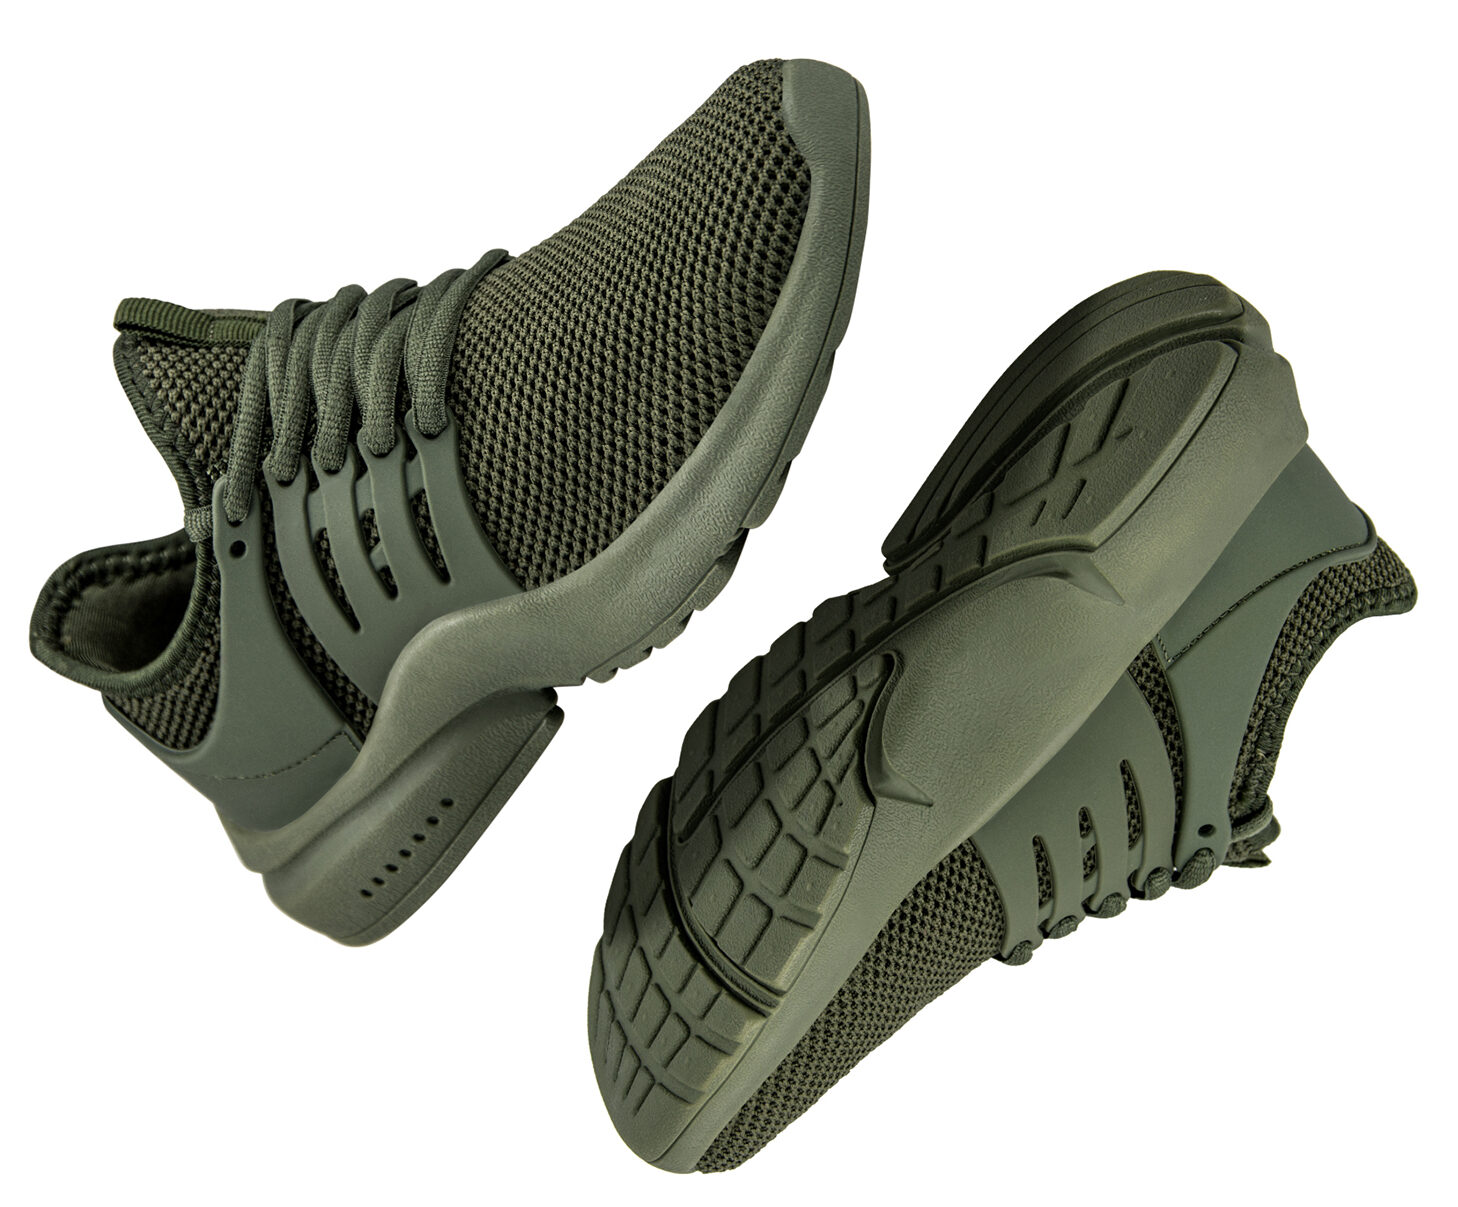 Keep fit and fashionable with the Troadlop Men’s Running Shoes